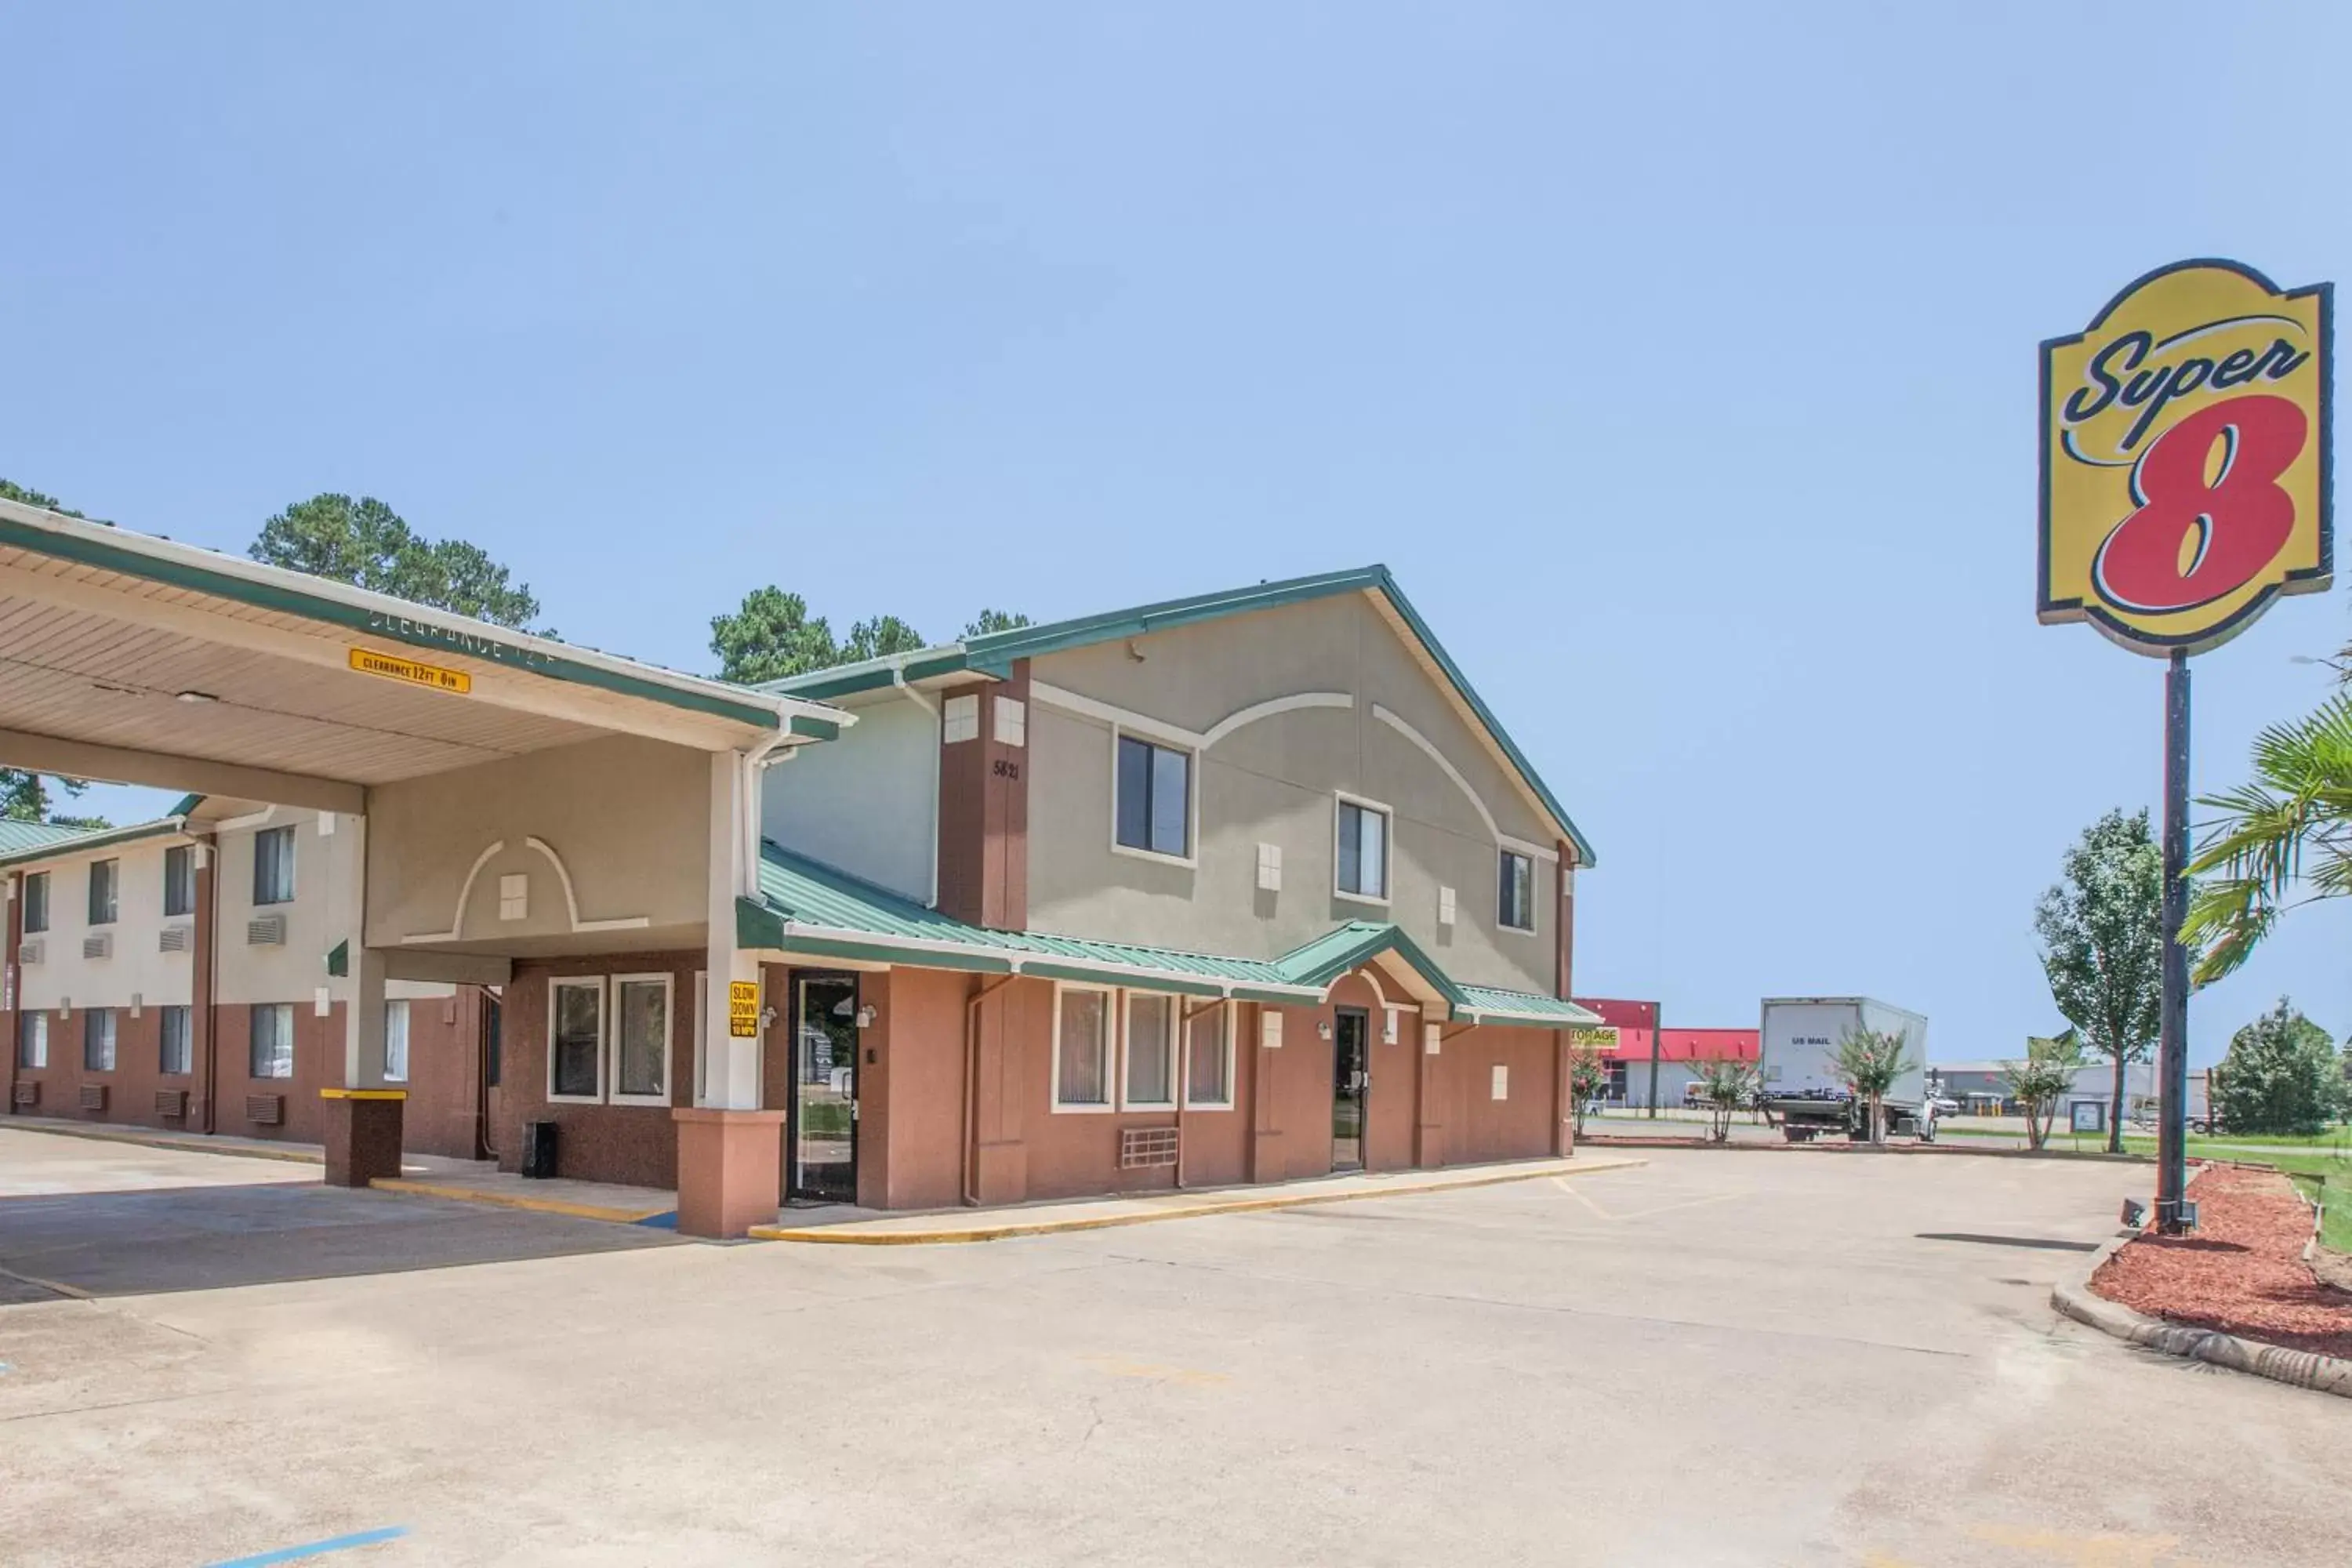 Facade/entrance, Property Building in Super 8 by Wyndham Natchitoches